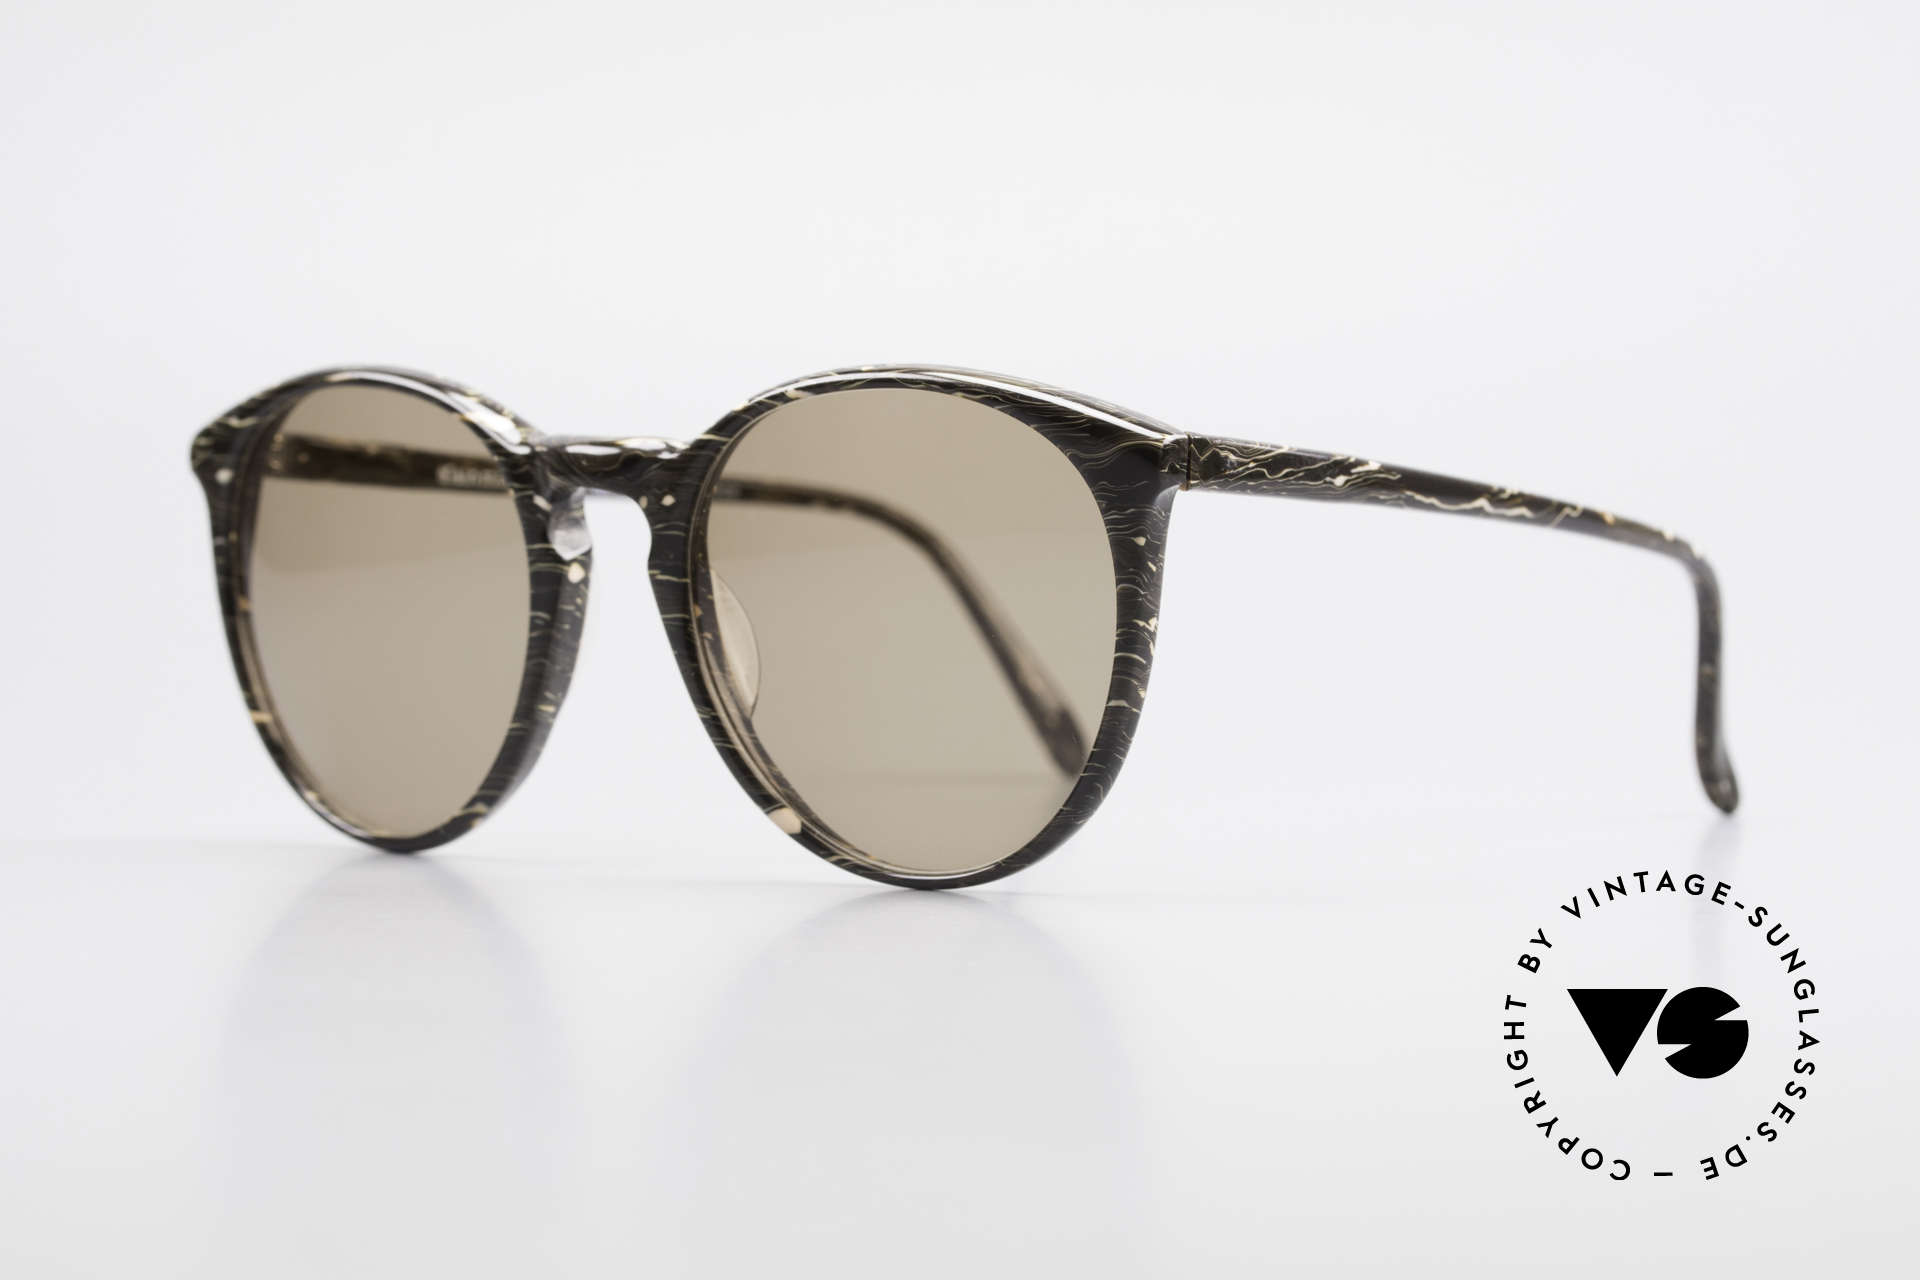 Alain Mikli 901 / 429 Brown Marbled Panto Shades, interesting frame pattern: brown / gray marbled, Made for Men and Women